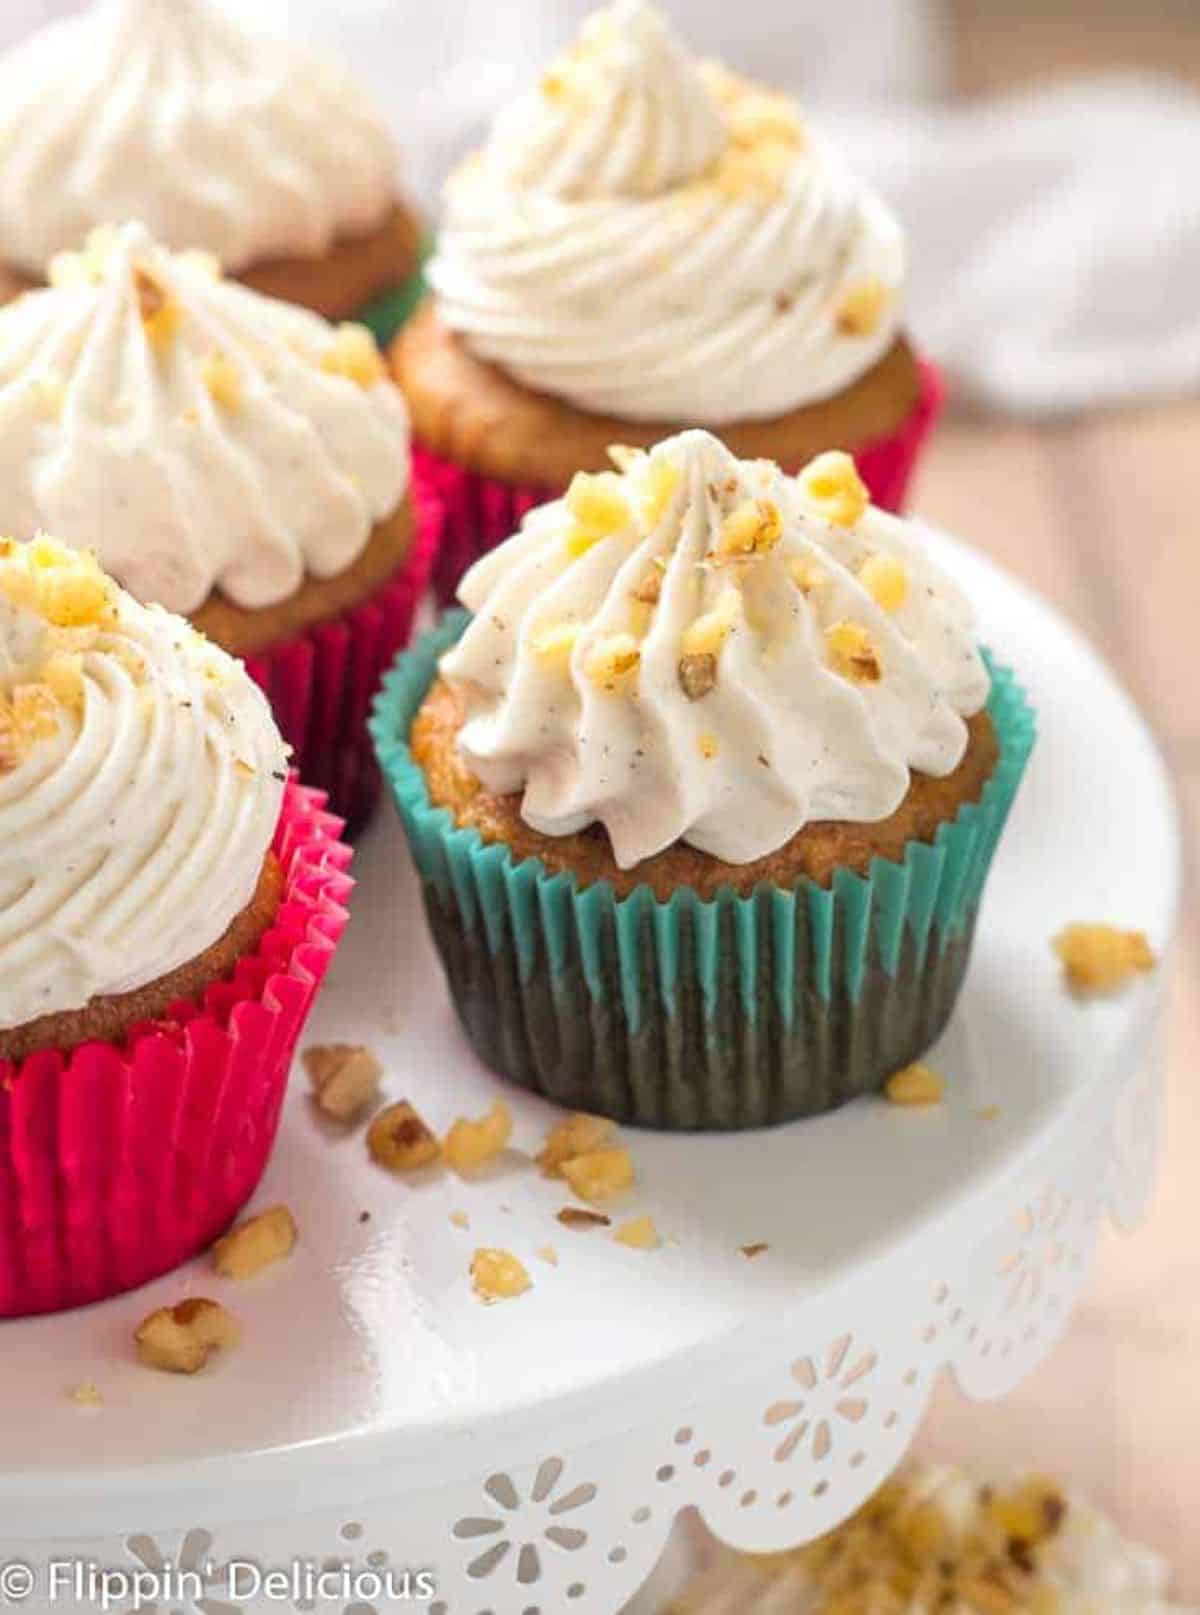 Delicious gluten-Free Carrot Cupcake on a cake tray.